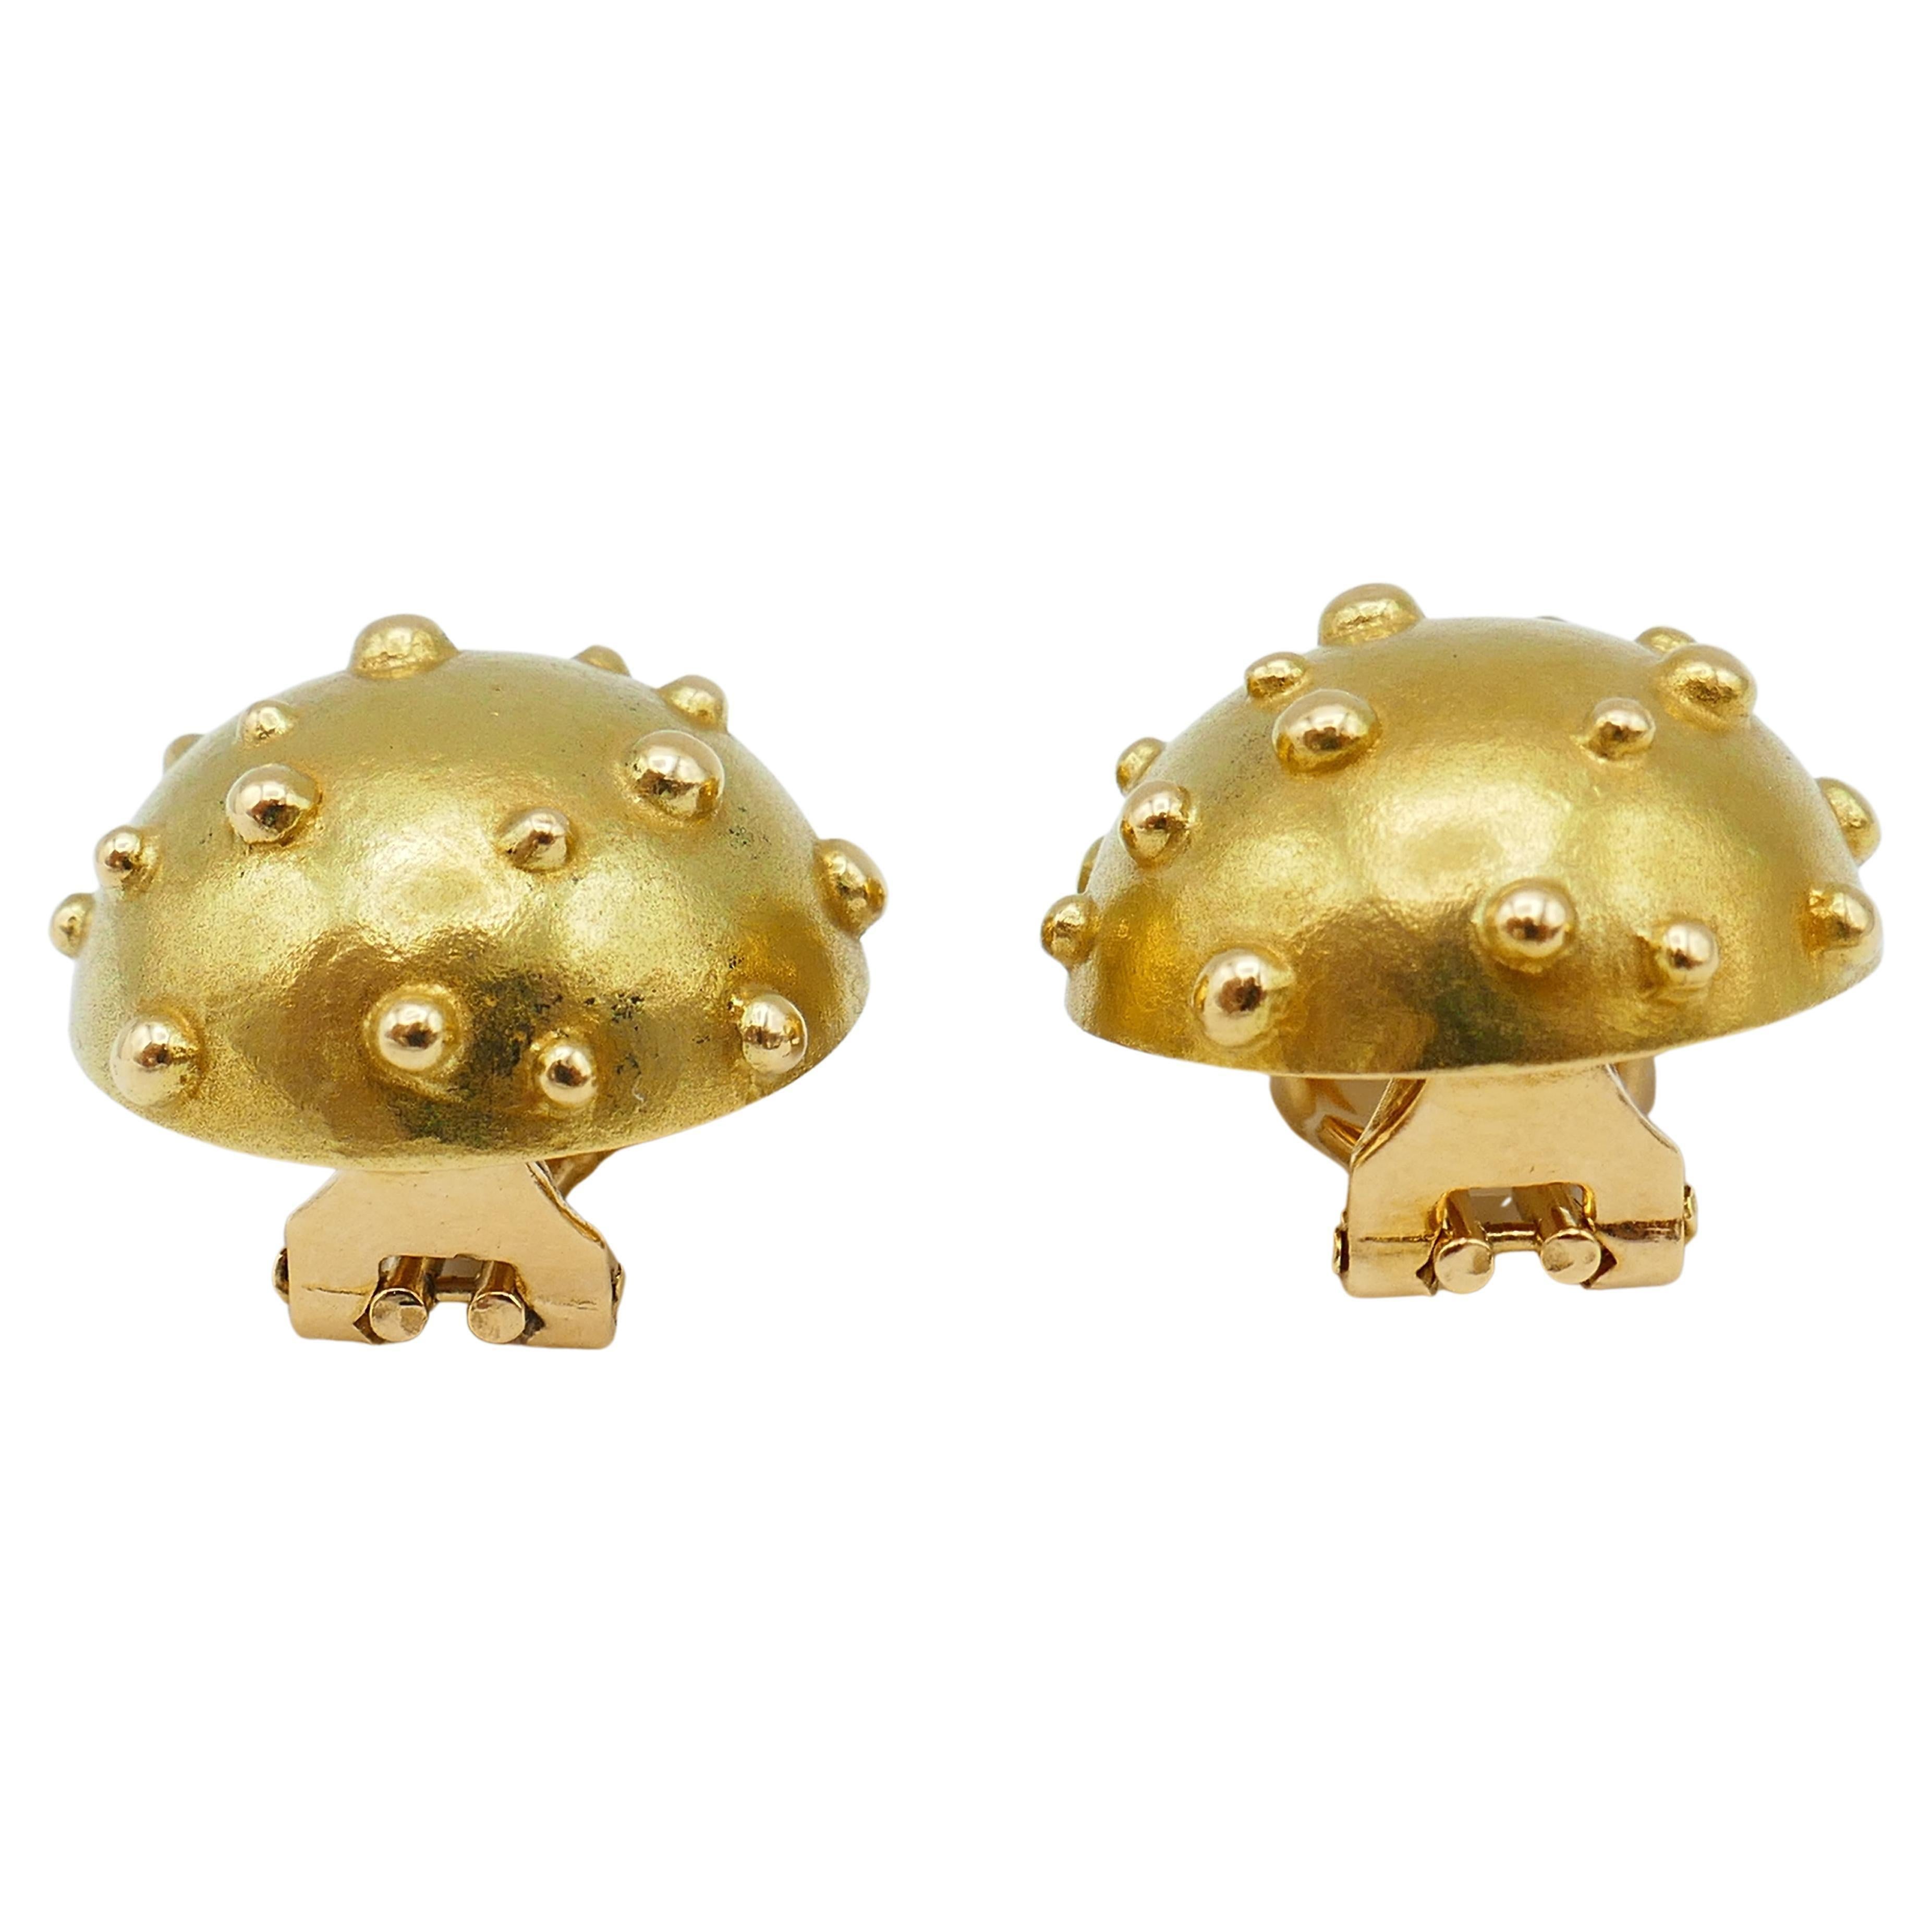 A cute yet refined pair of Tiffany & Co. Dot Mushroom gold earrings. 
The earrings have simple, pure look, but they are fun, eloquent and visible by design.
Note a dome convex shape and the gold color. The latter is subtle and carries a great